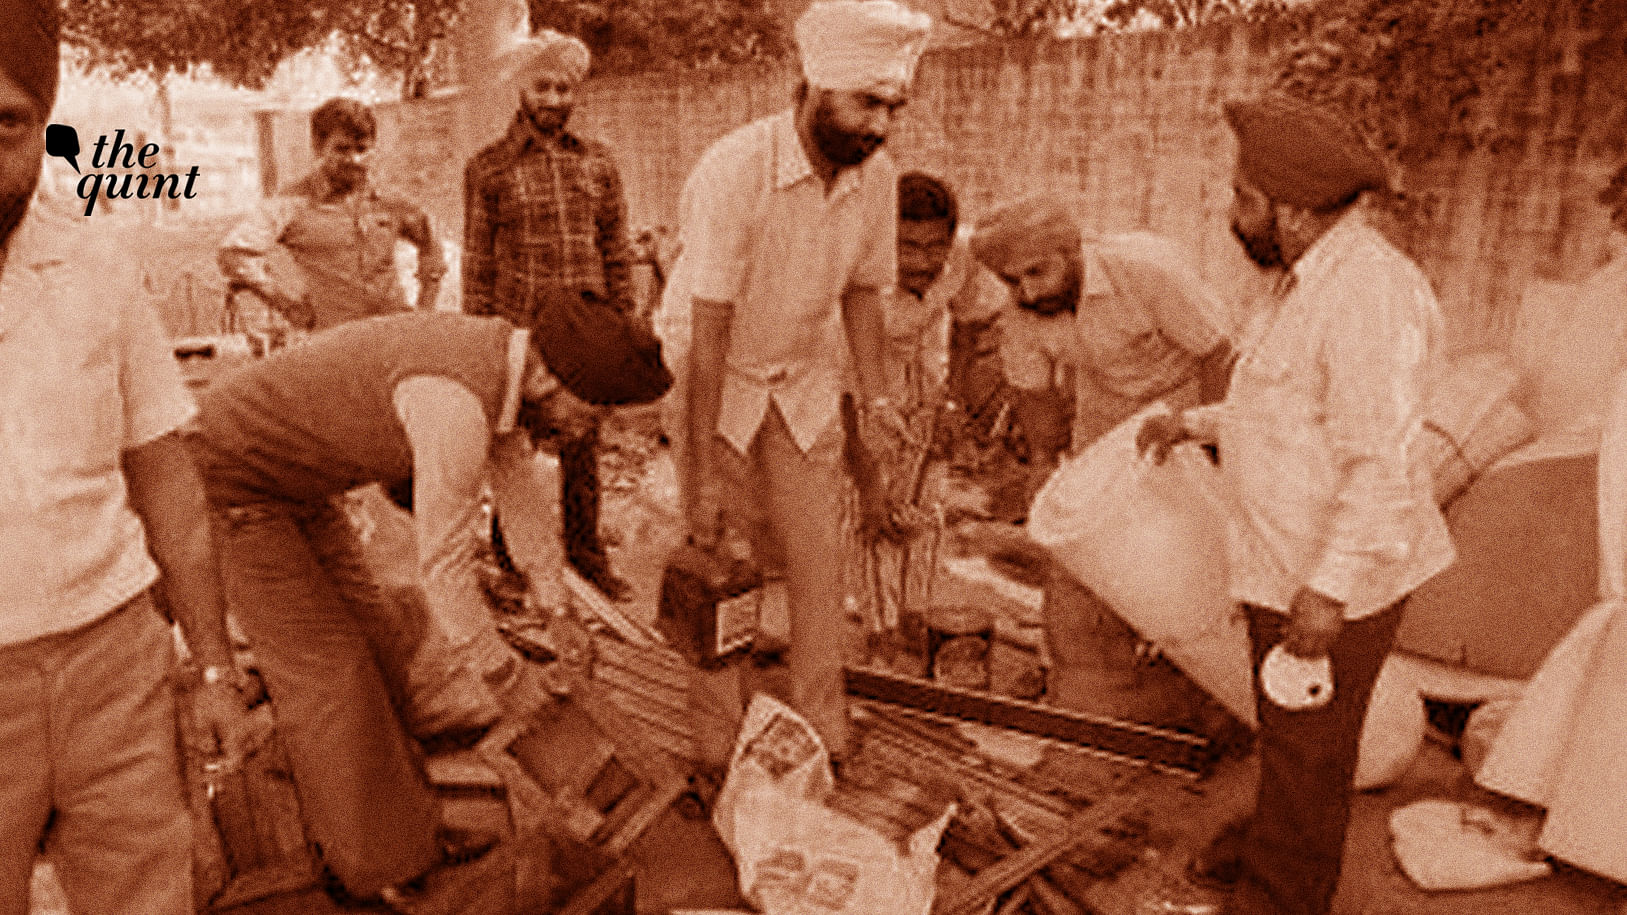 According to official estimates, nearly 3000 Sikhs were killed in Delhi alone in the 1984 pogrom.&nbsp;